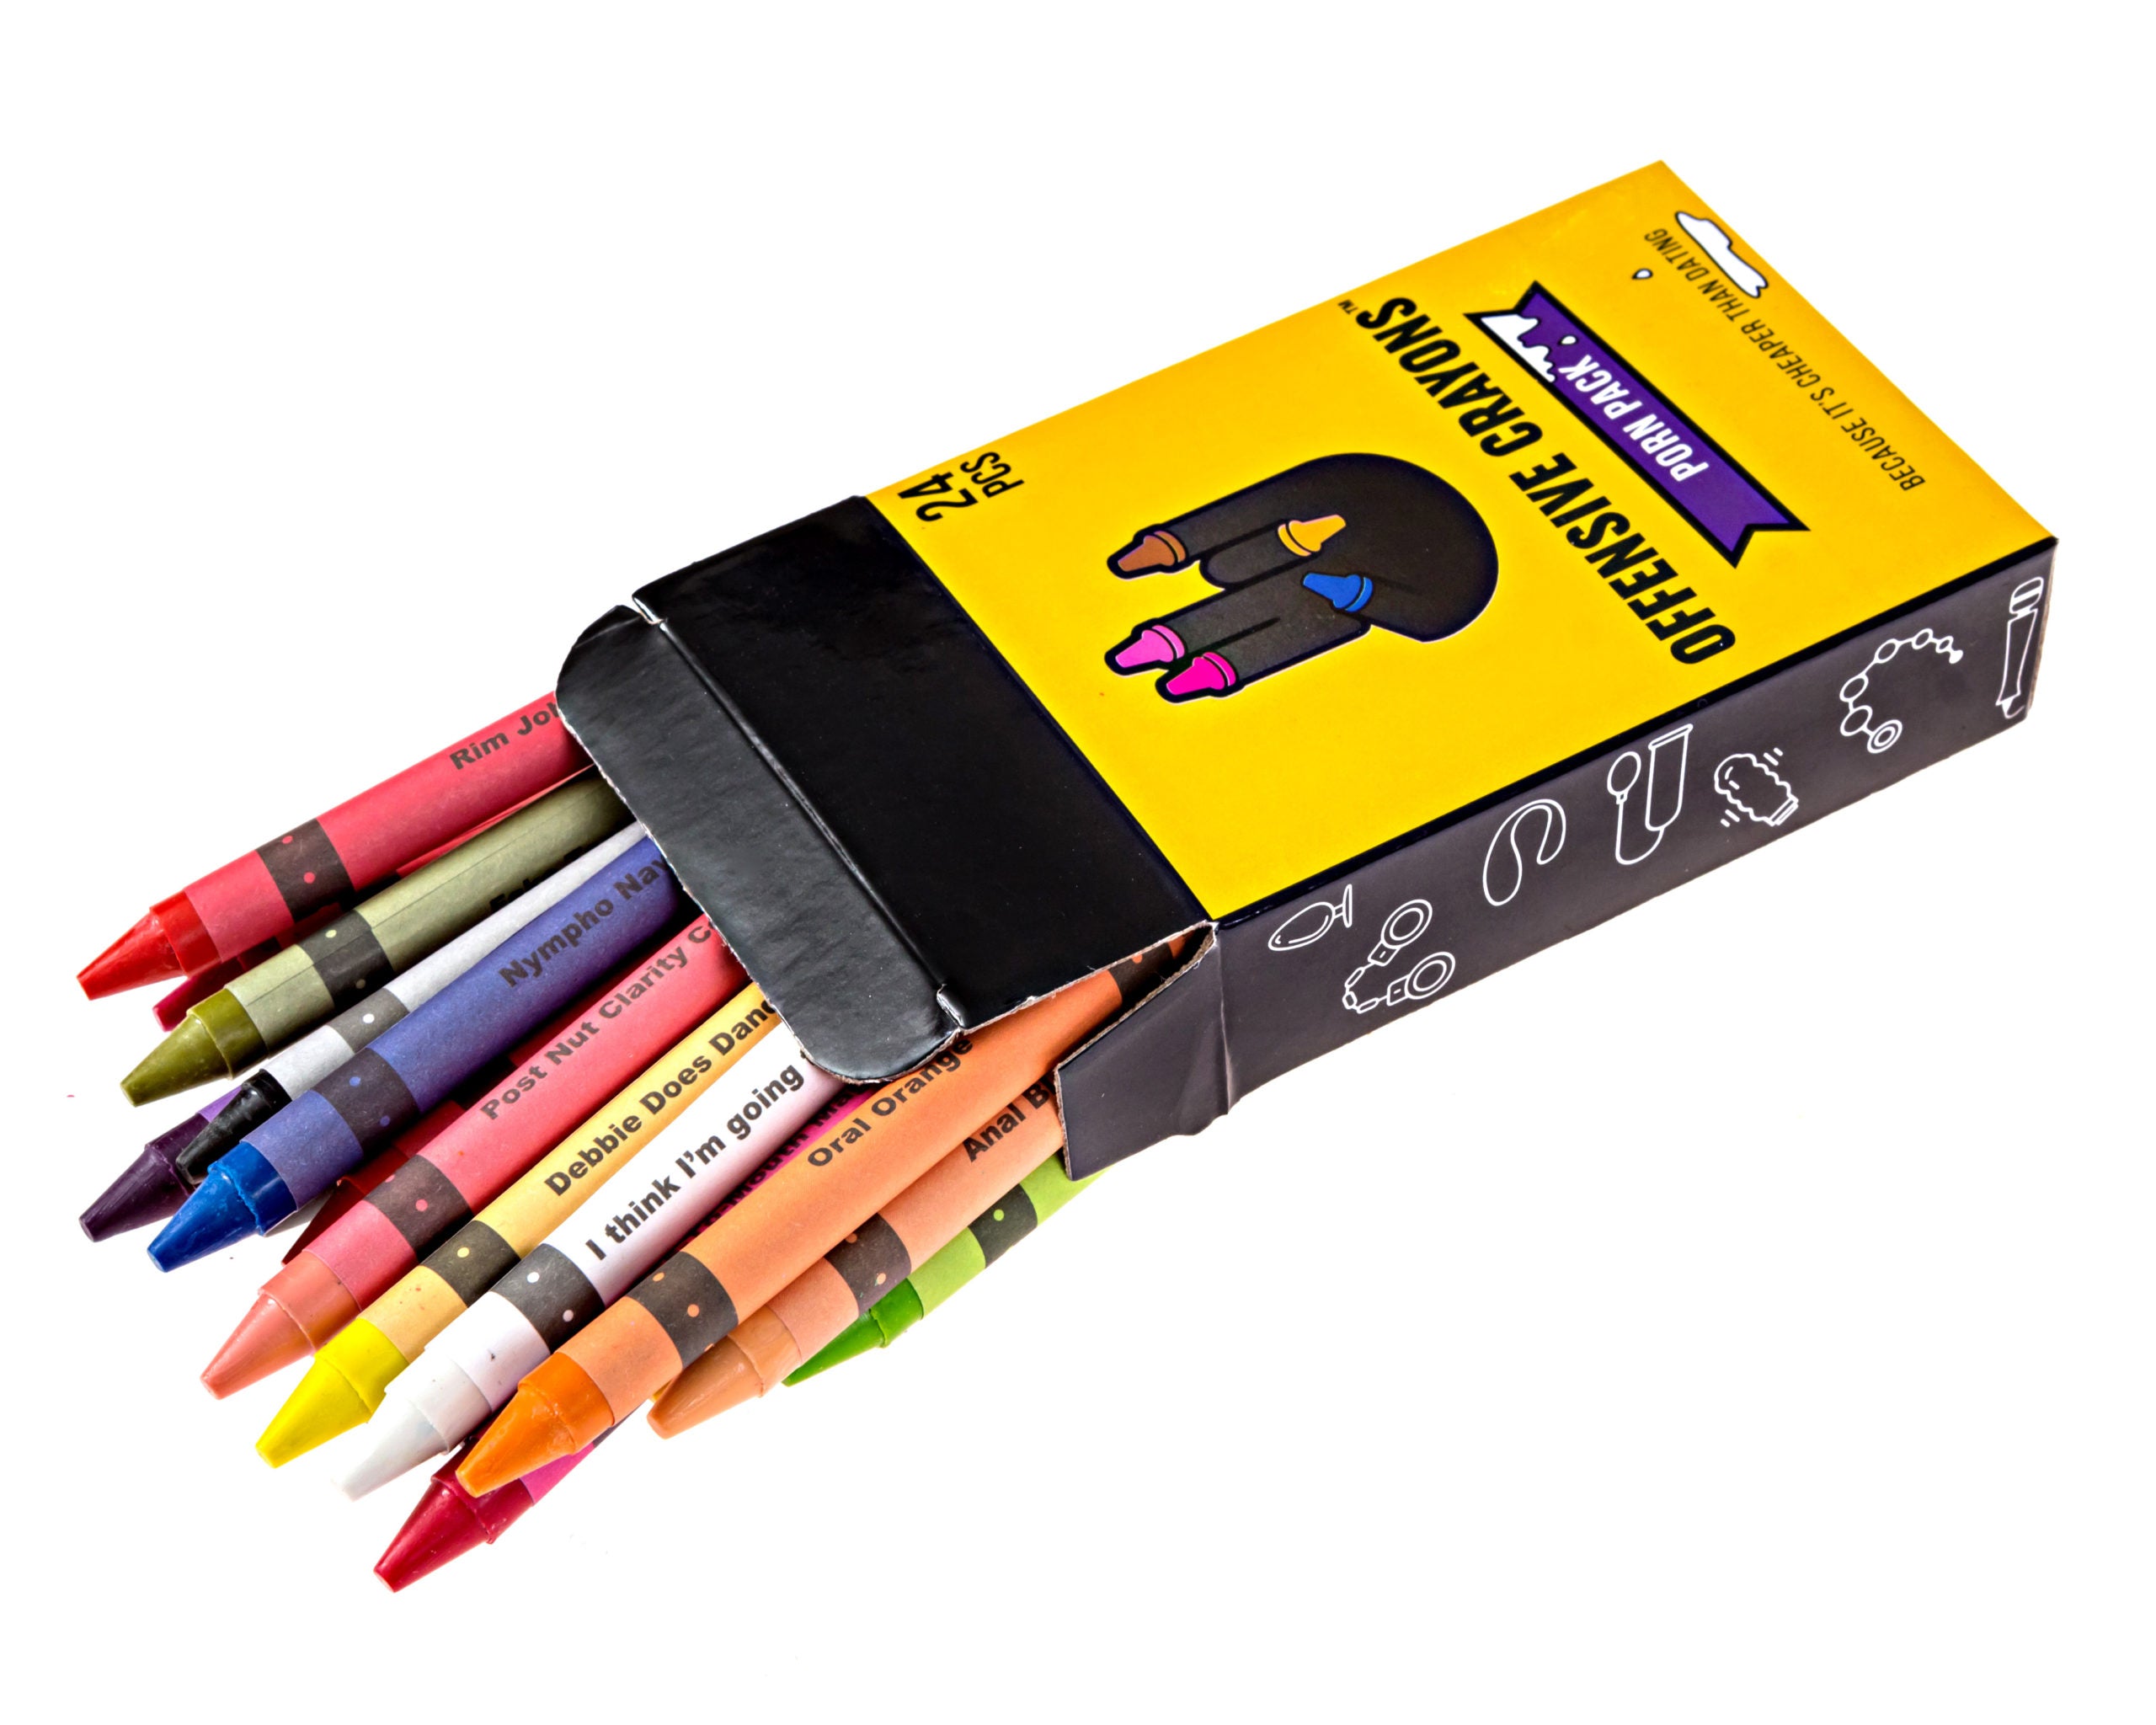 Cat Pens, 10 pc – Offensive Crayons